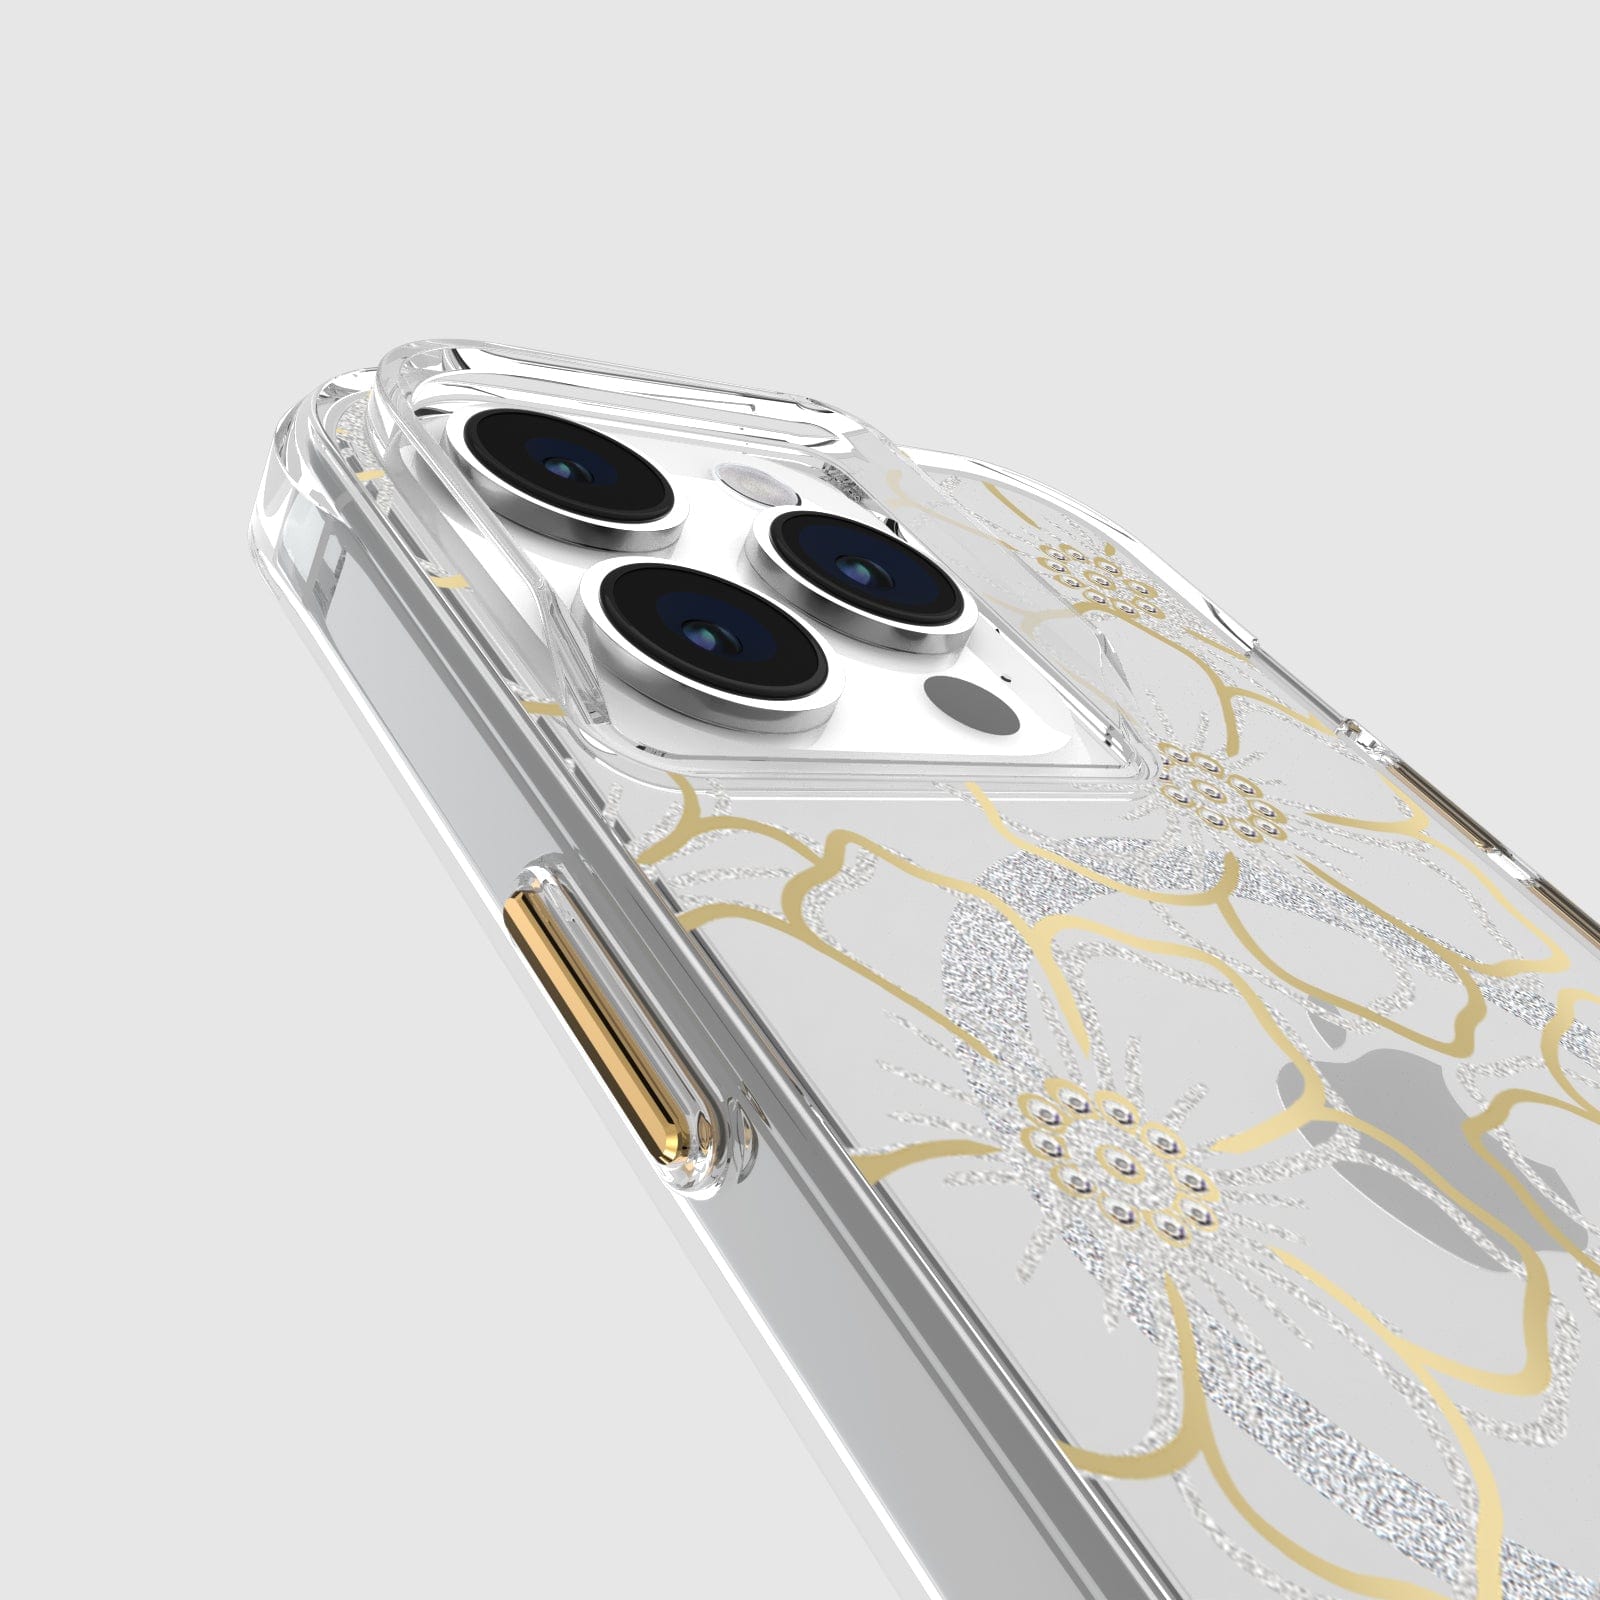 Floral Gems MagSafe - iPhone 15 Pro Max